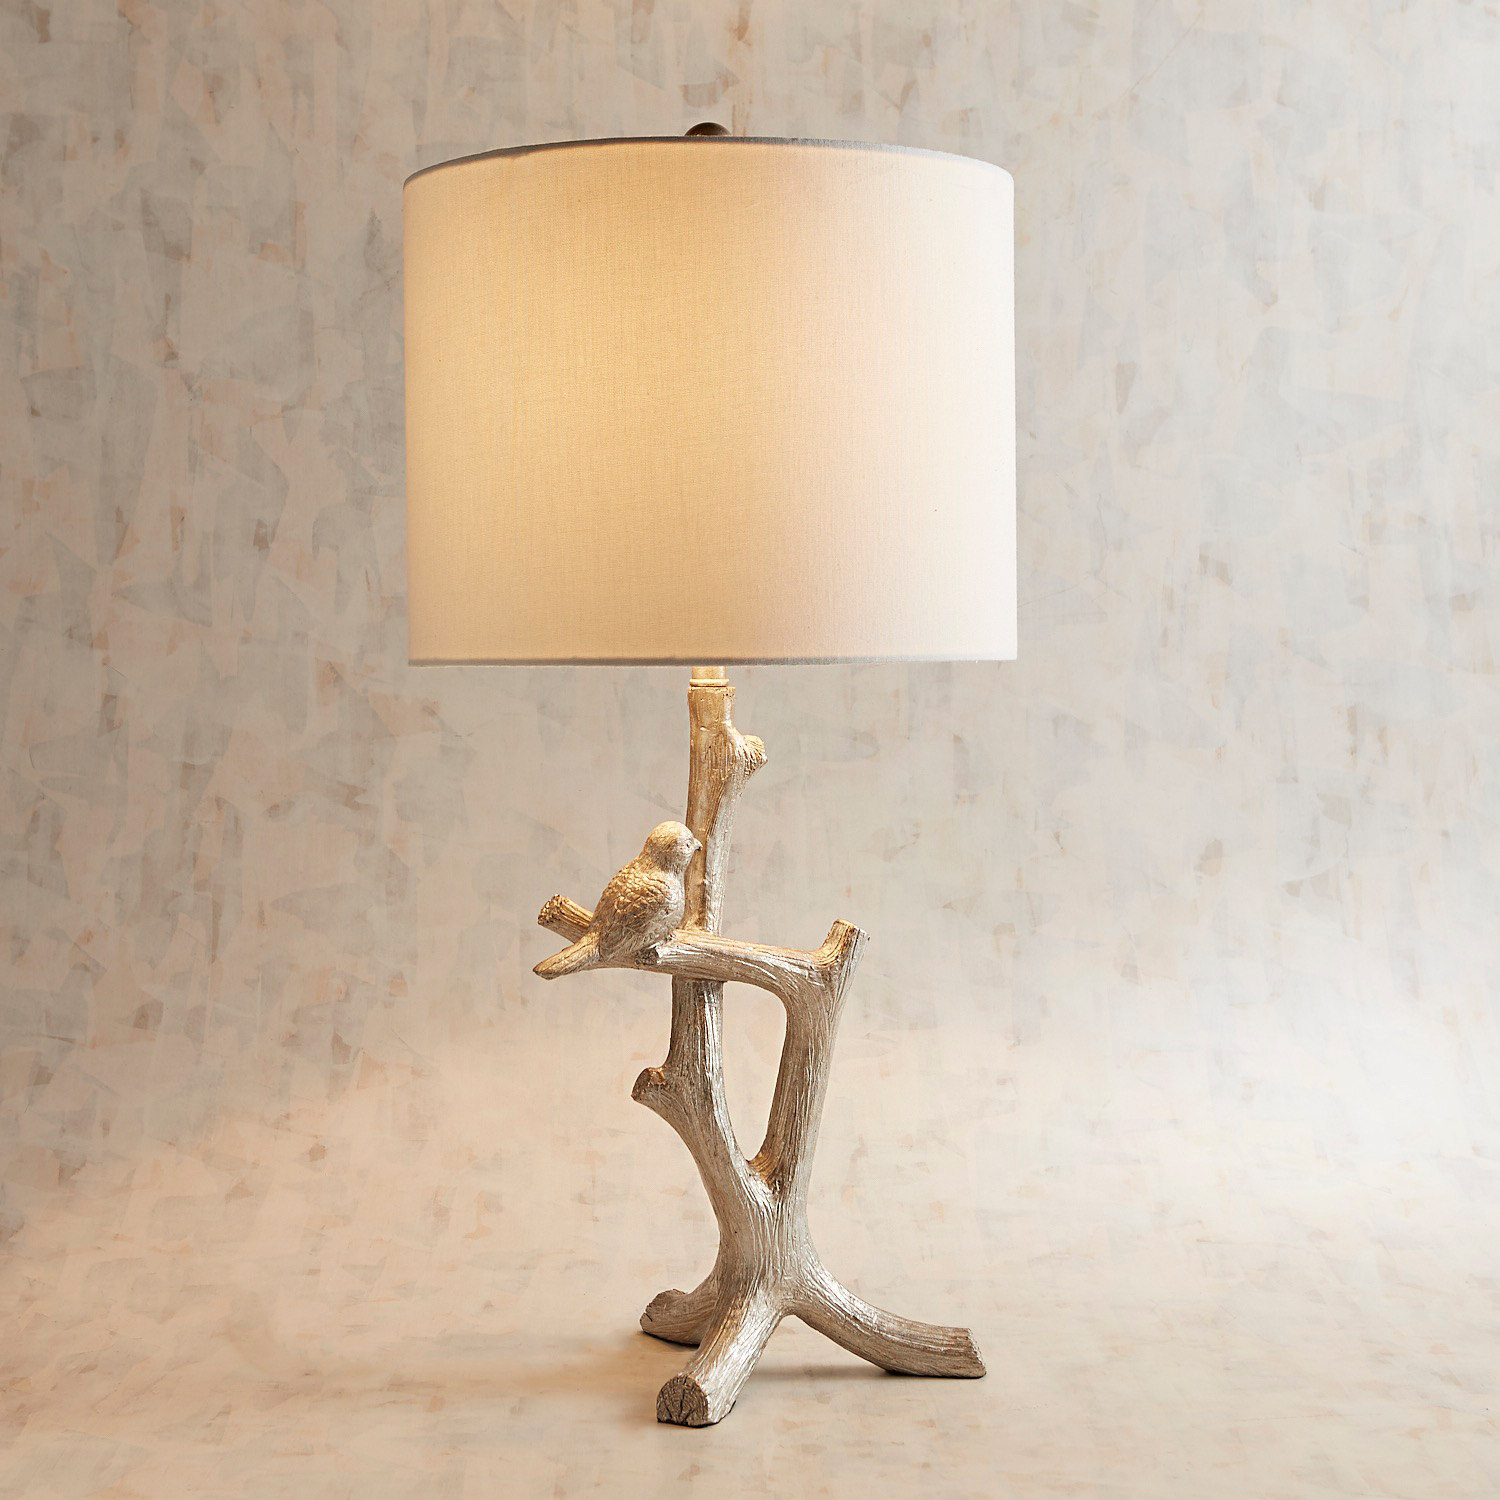 Silver Branch Table Lamp Antique Table Lamps Outdoor in sizing 1500 X 1500